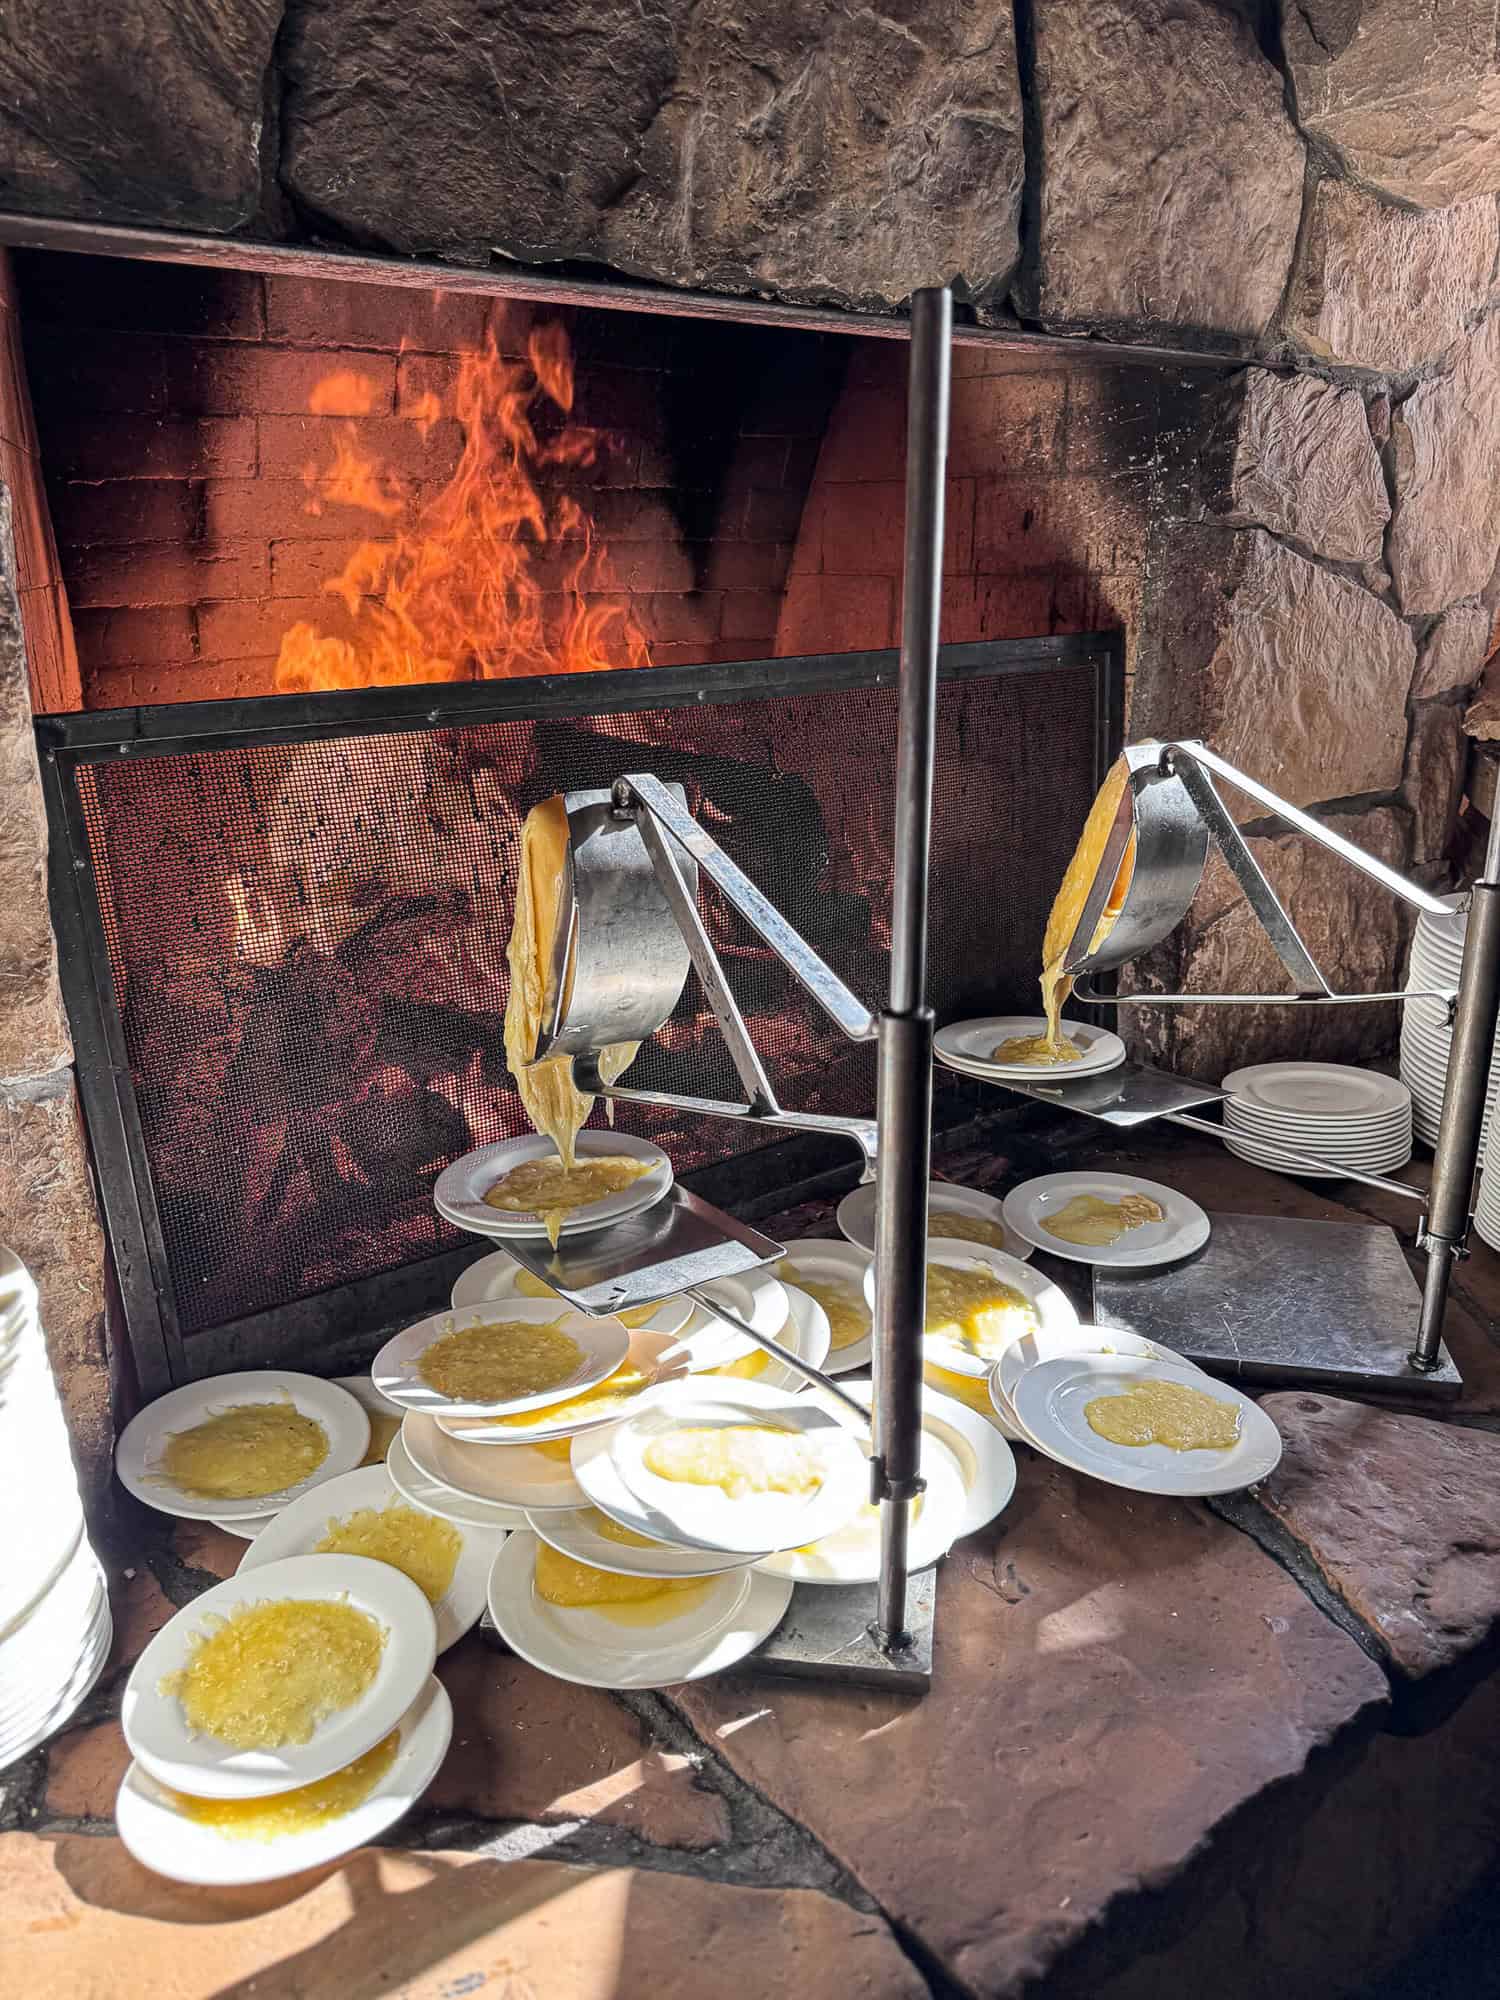 Racklet cheese melting by a fire at Deer Valley Resort